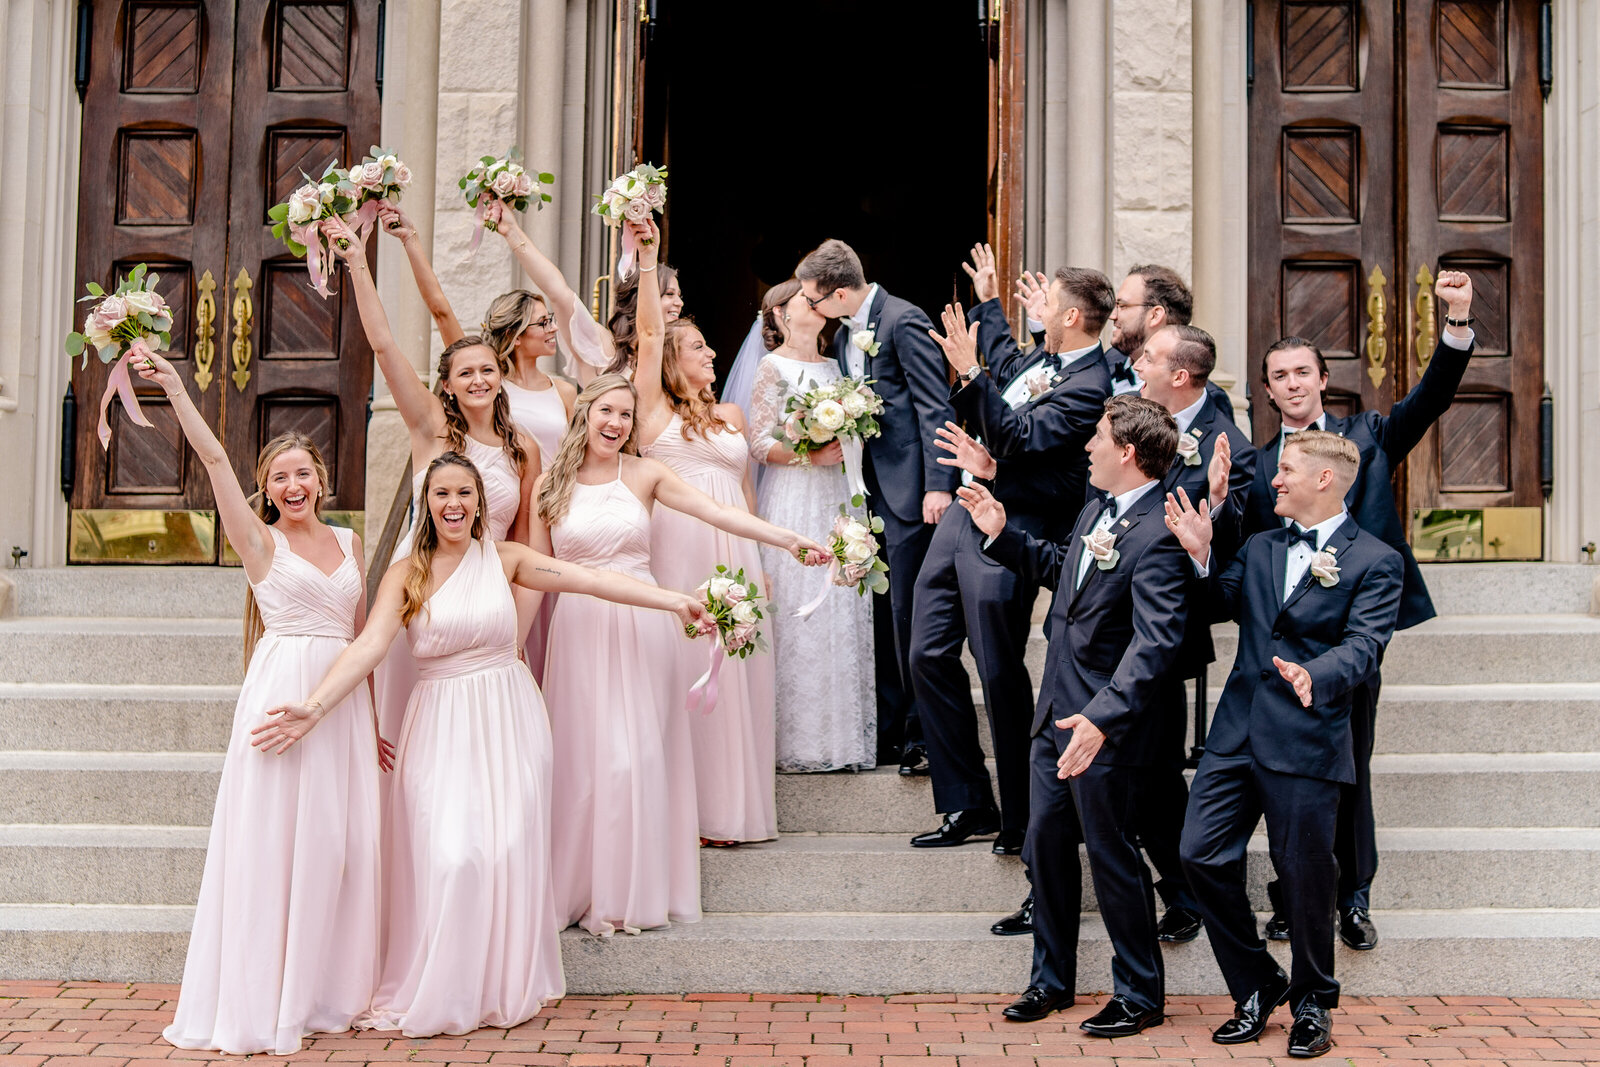 A wedding party cheering as the bride and groom share a kiss on the front steps after a wedding at the Basilica of Saint Mary in Alexandria Virginia